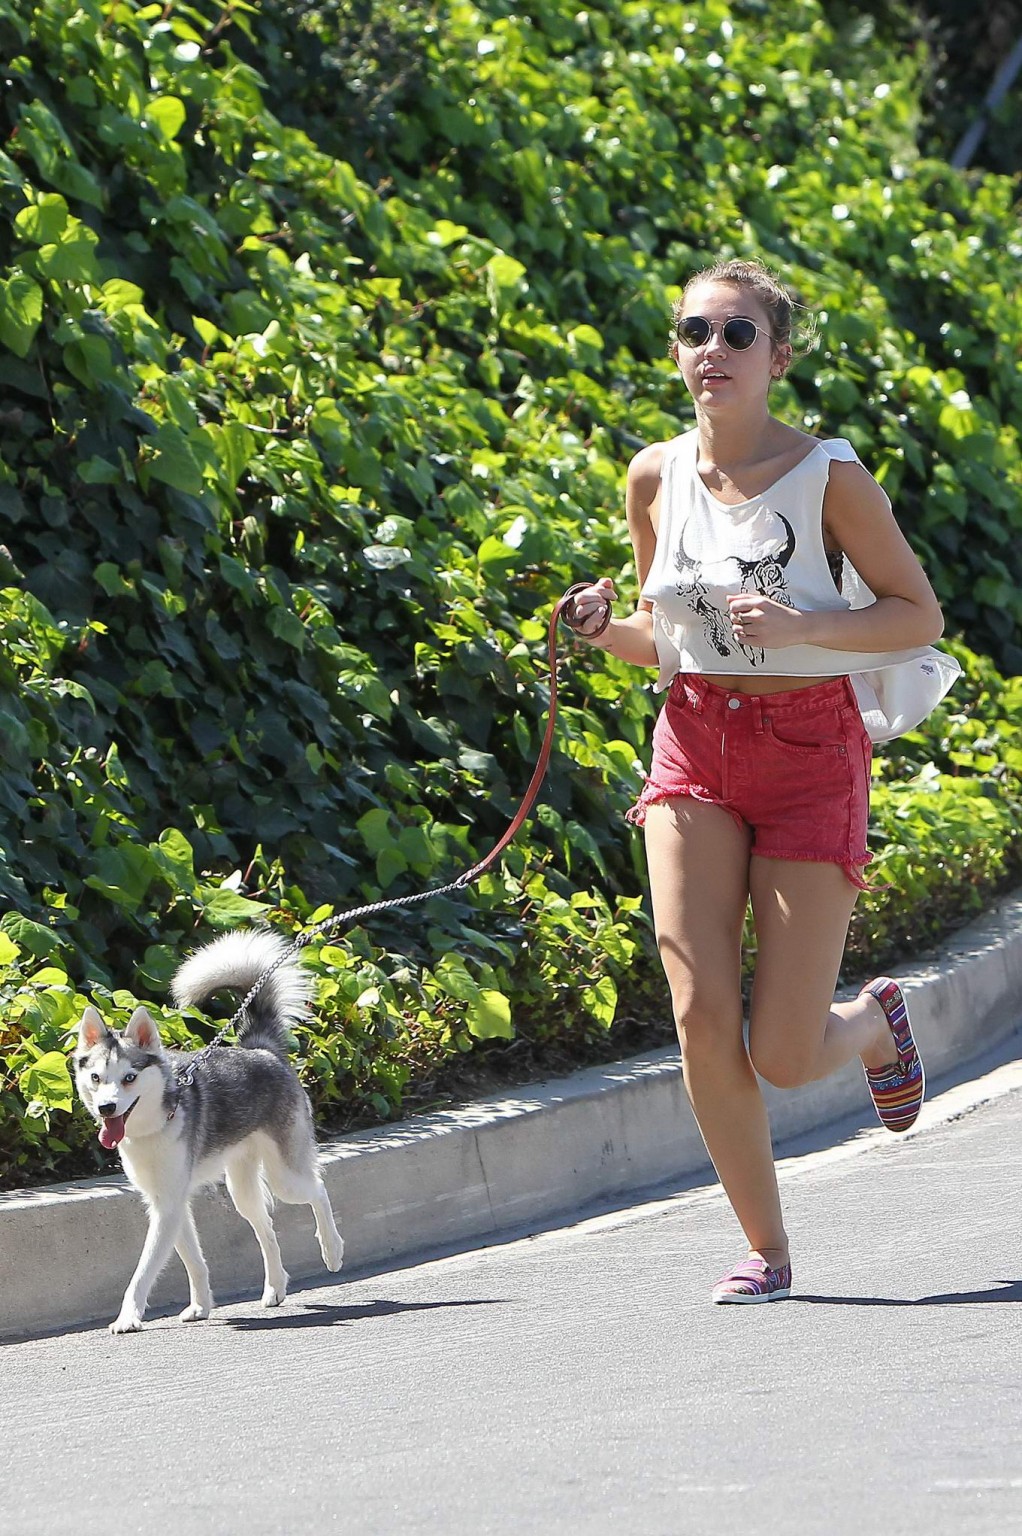 Miley Cyrus leggy running out her doggy wearing red hotpants in LA #75271568